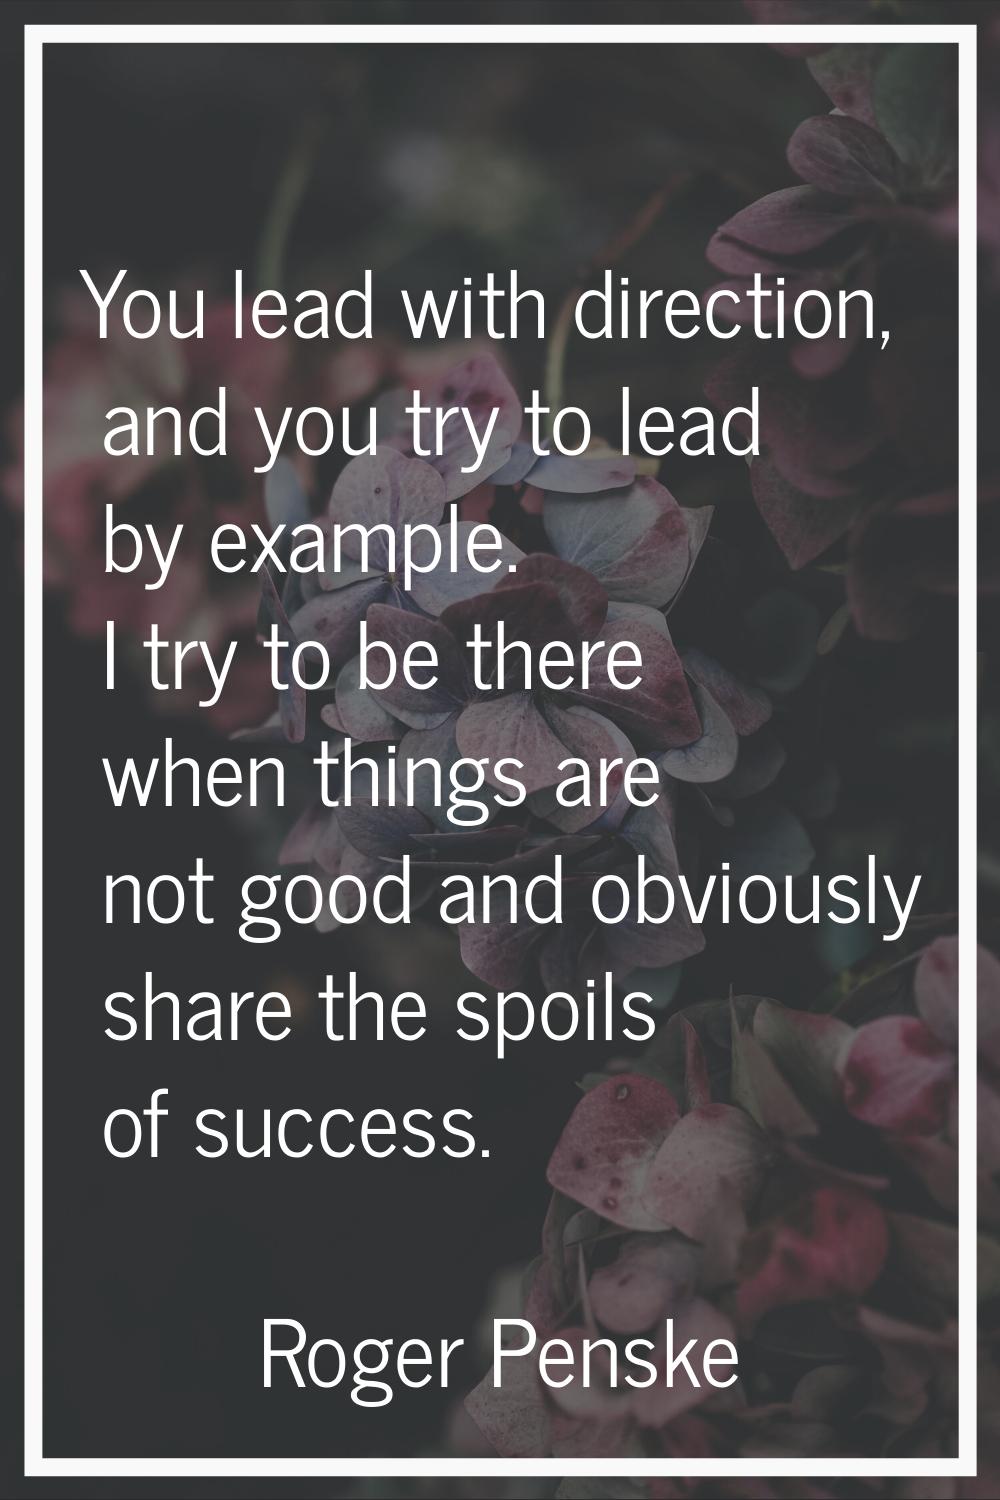 You lead with direction, and you try to lead by example. I try to be there when things are not good